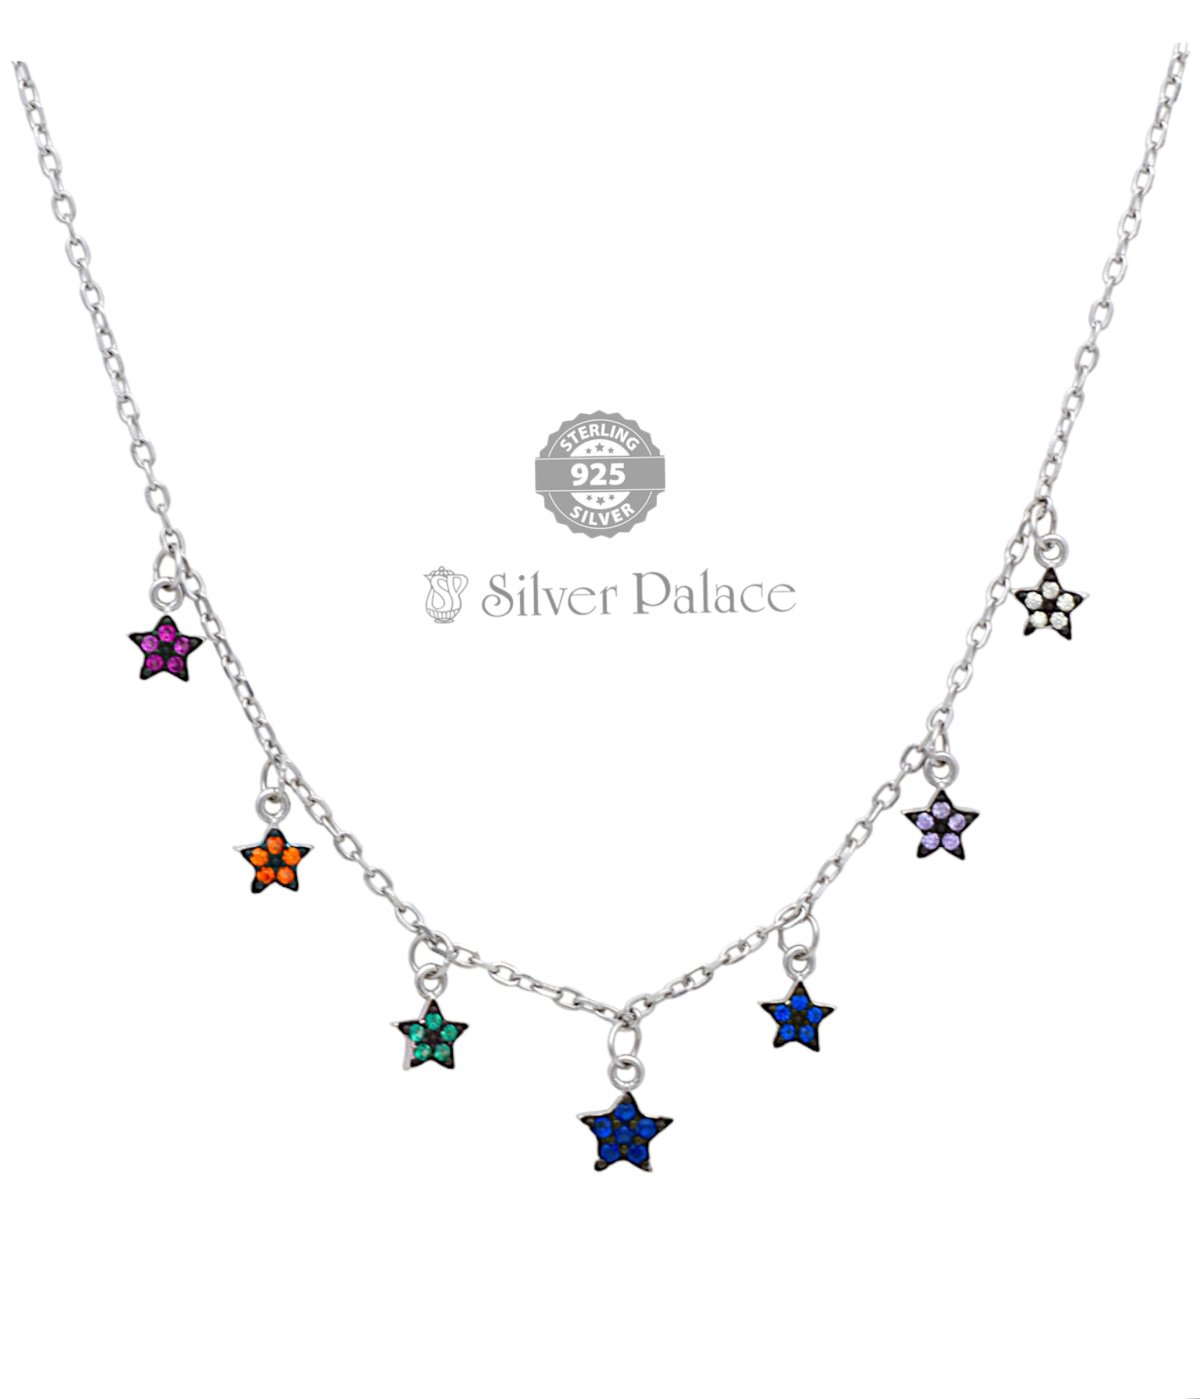 92.5 Multi Star Shaker Silver Necklace for Girls